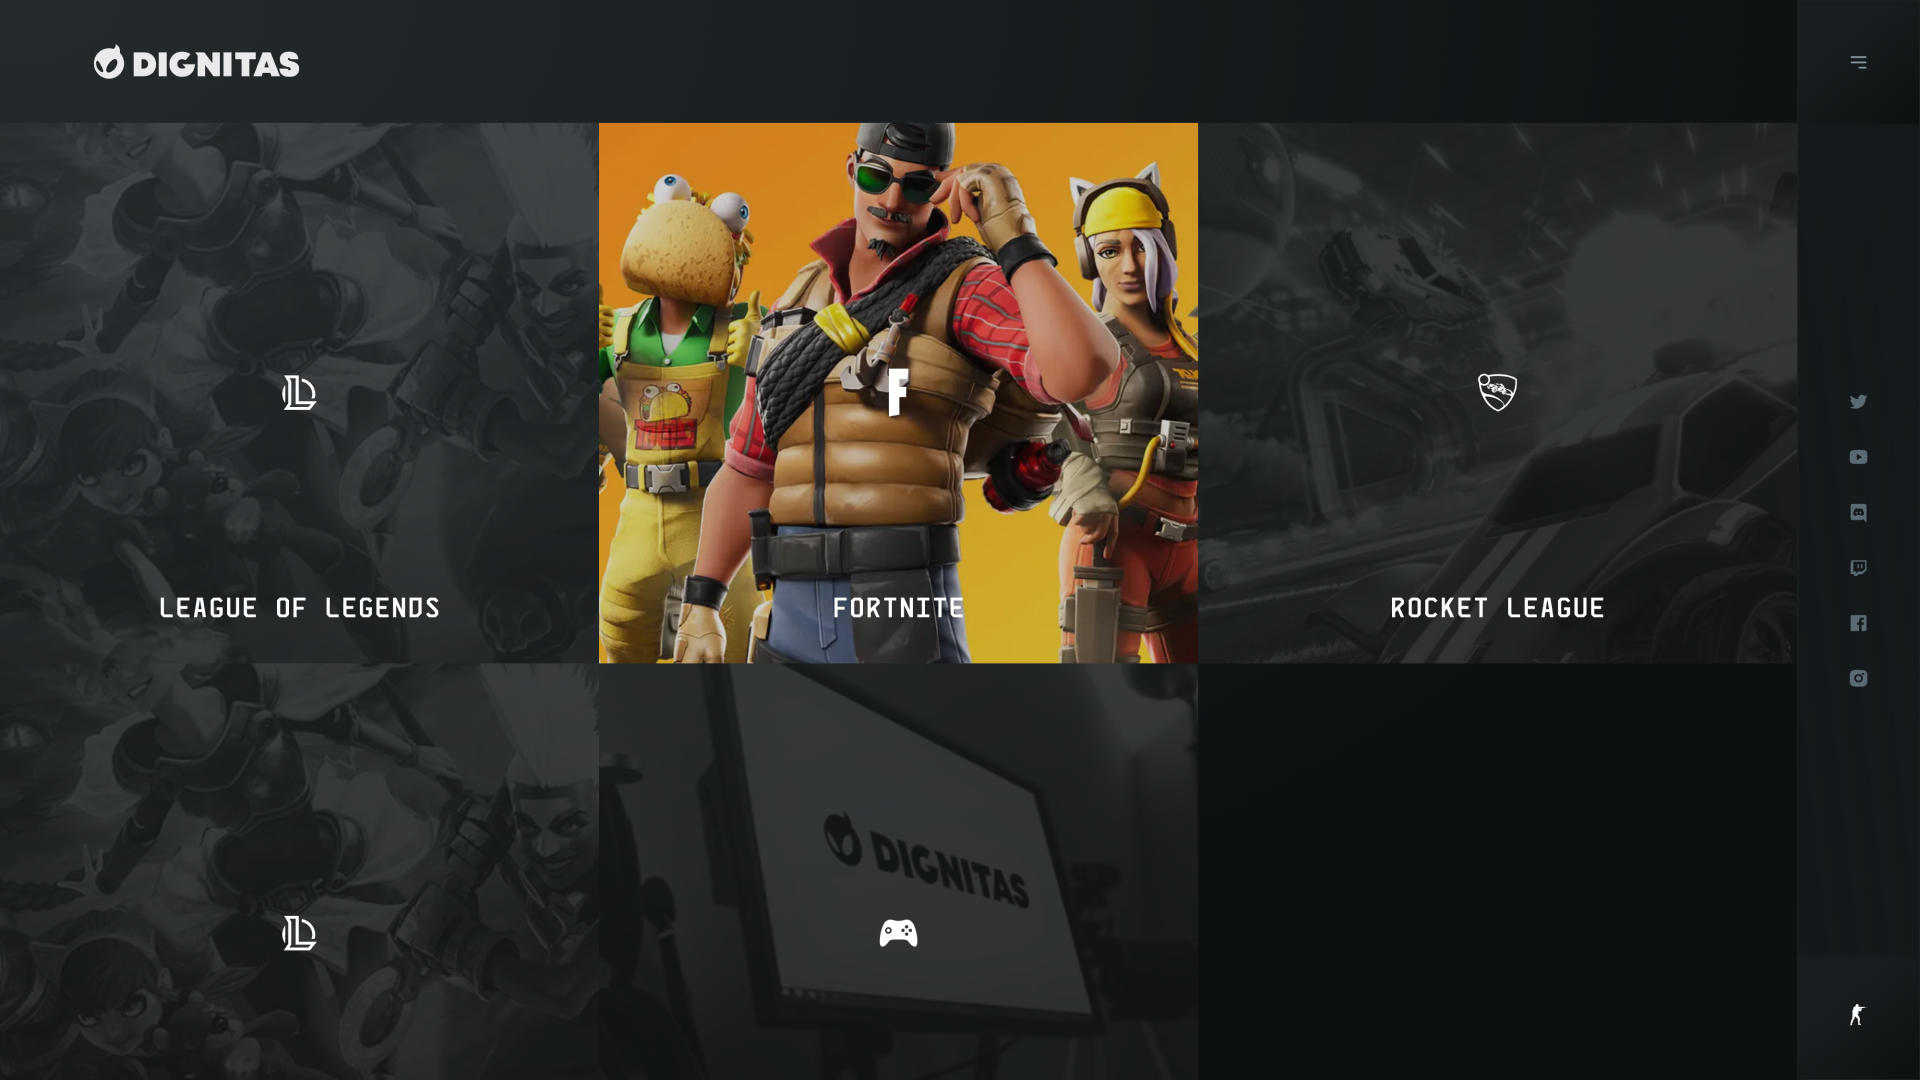 A screenshot from a dignitas.gg game selector page. A grid of game images in black and white, with Fortnite selected. The selected game is in color.